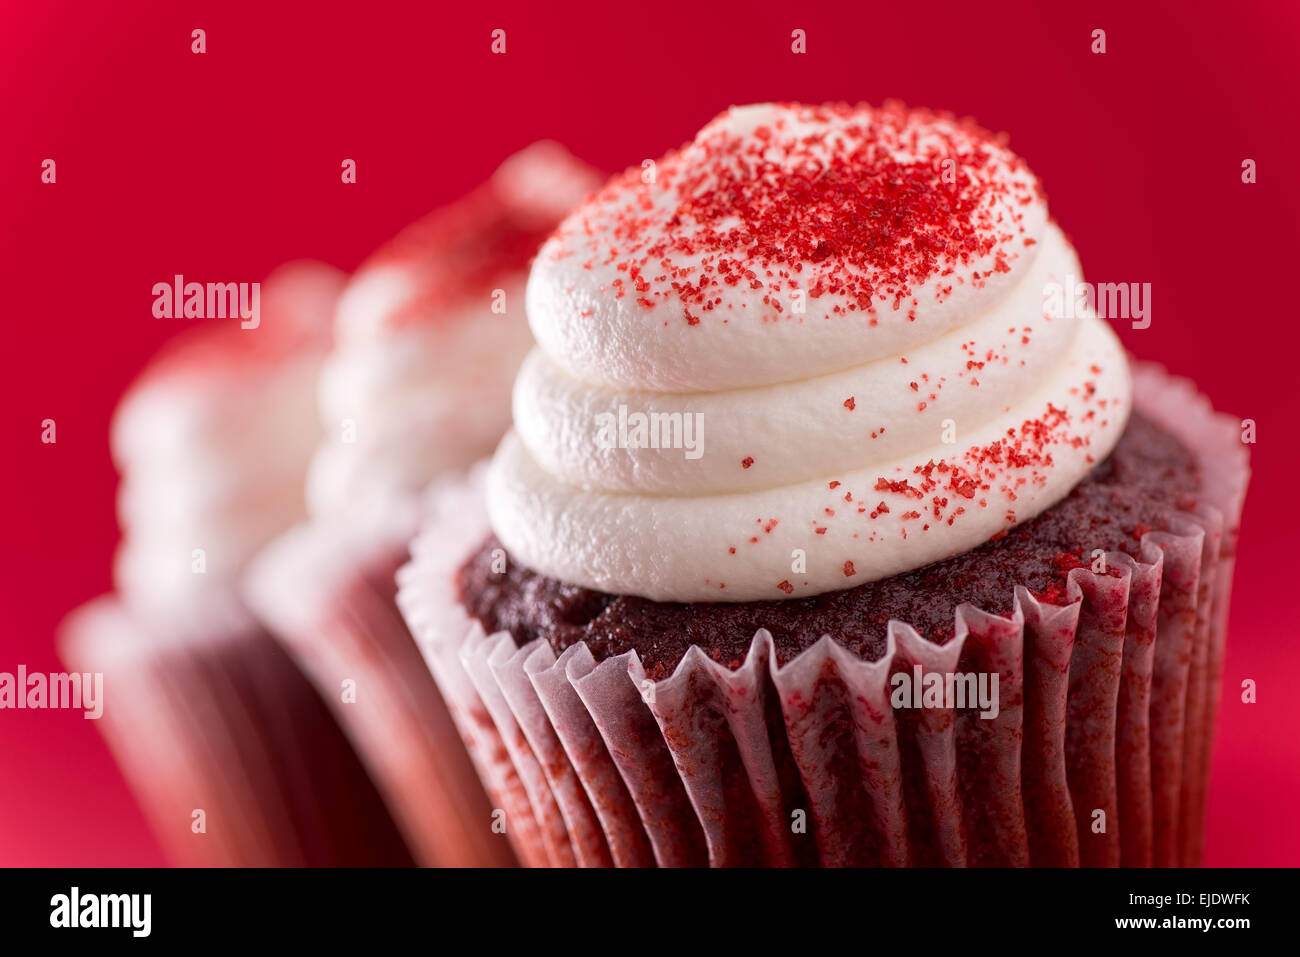 Three delicious red velvet cupcakes against a red background. Stock Photo